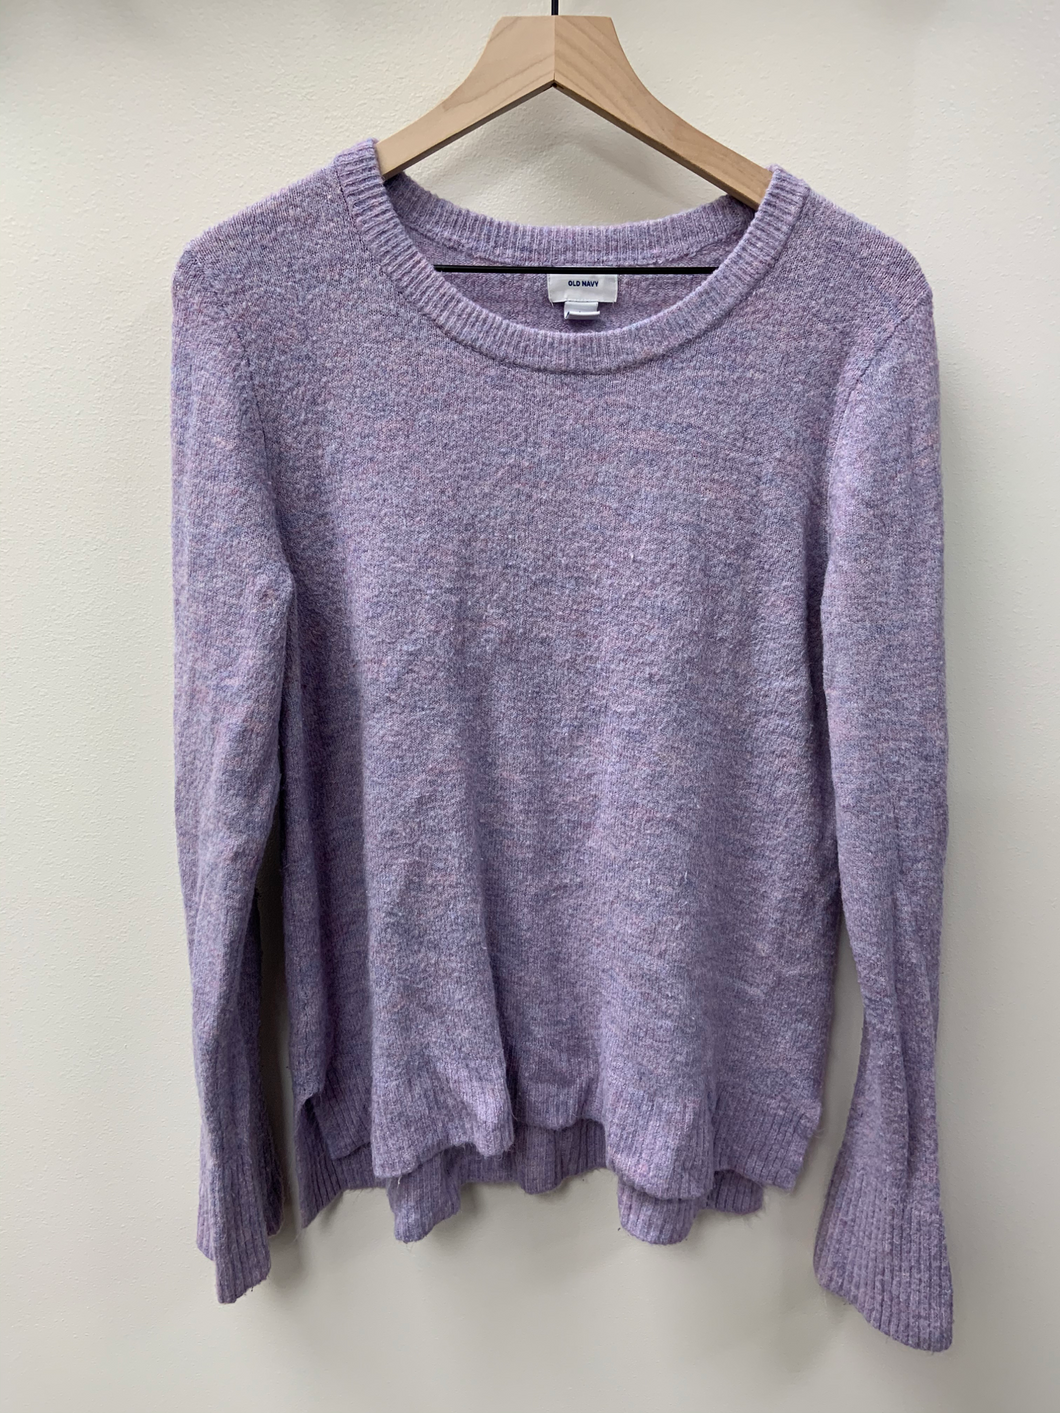 Old Navy Sweater Size Large